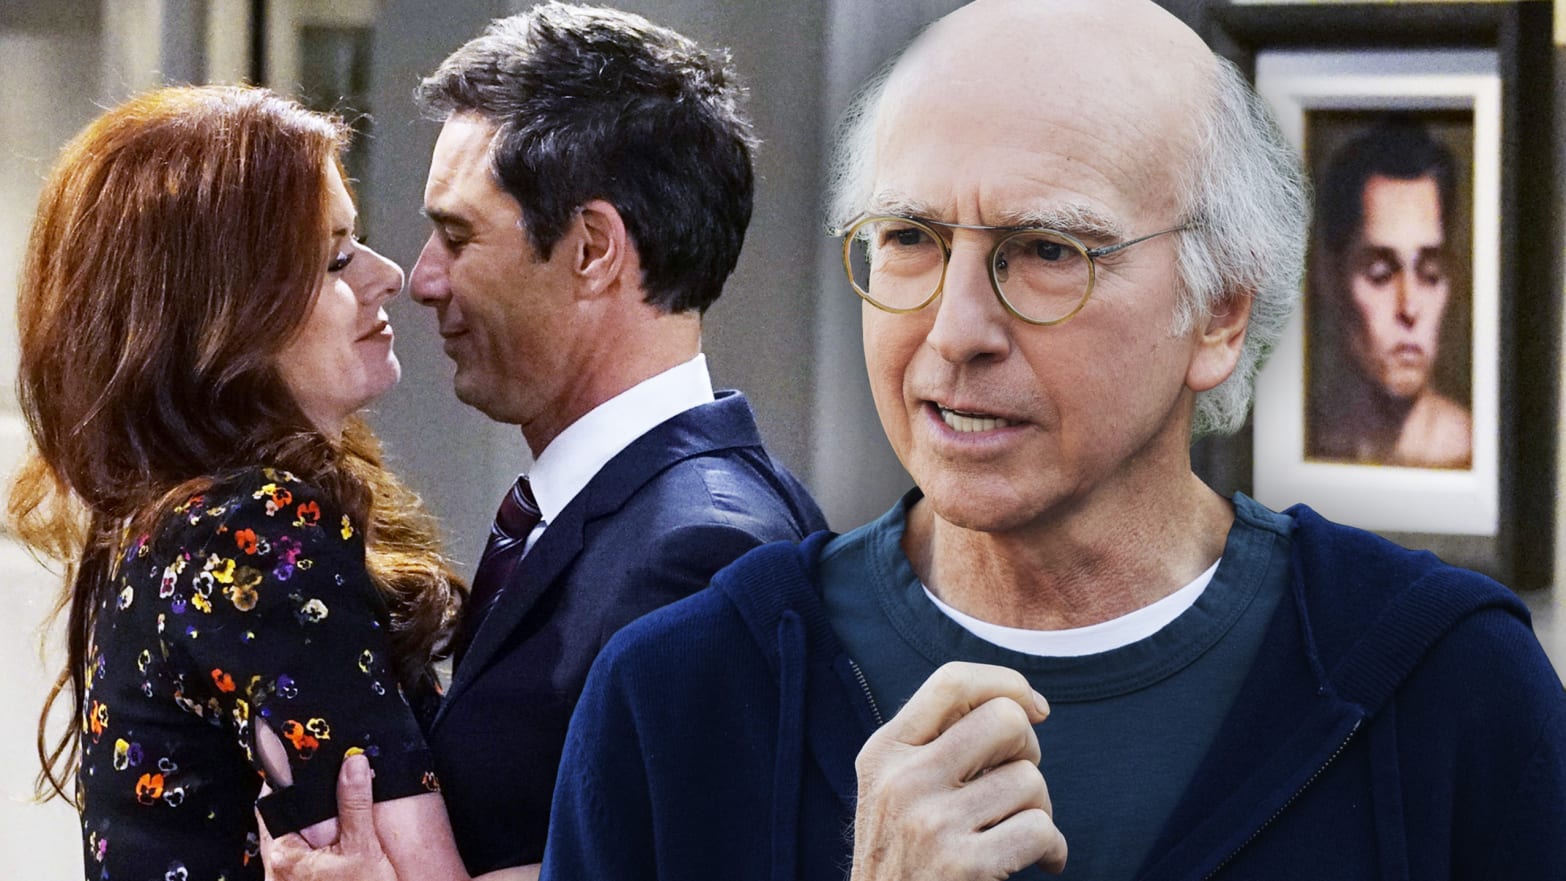 The New ‘Will & Grace’ Makes Me Cry. The New ‘Curb’ Makes Me Groan.